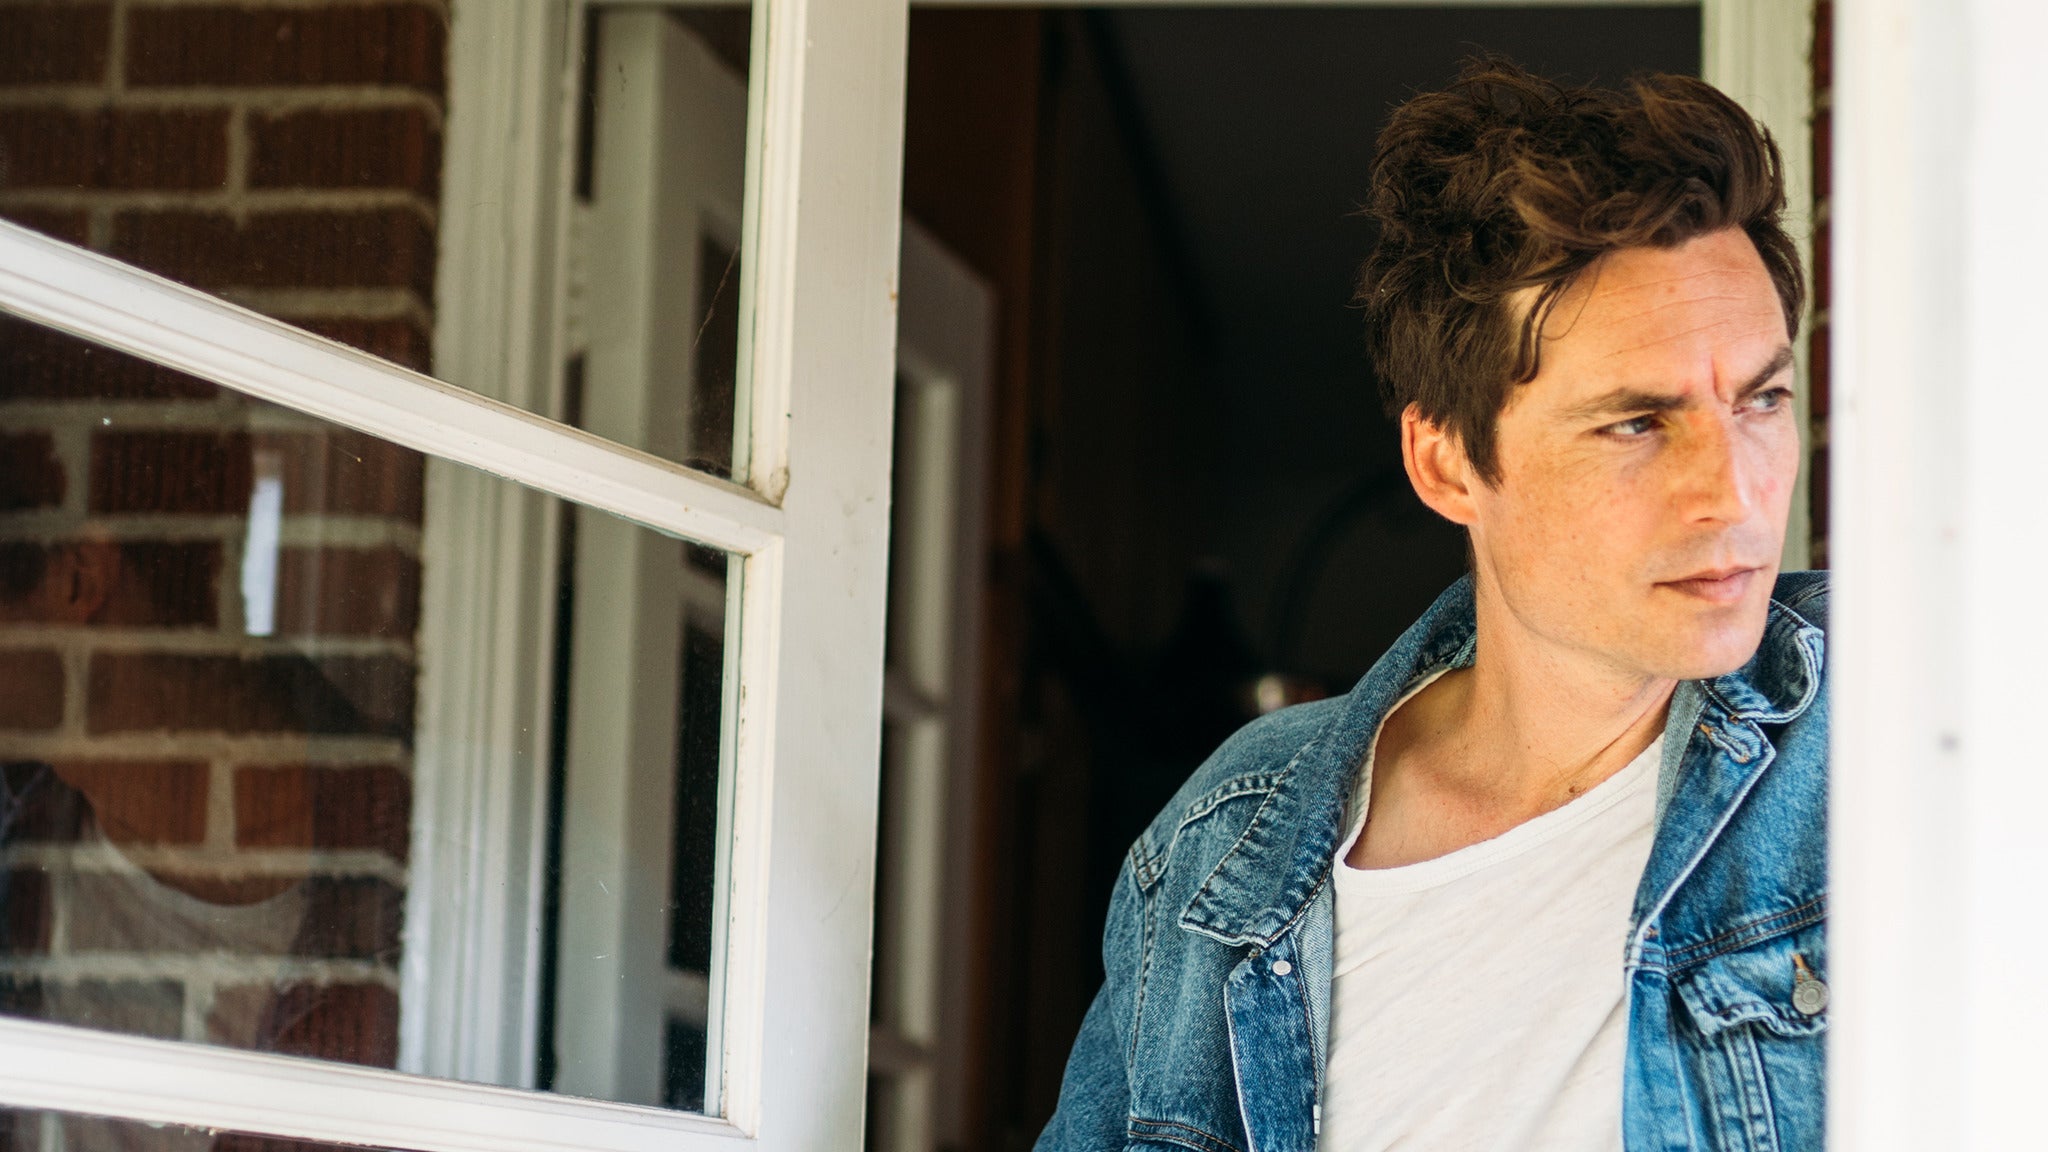 Augustana, Solo Tour in Minneapolis promo photo for Live Nation presale offer code